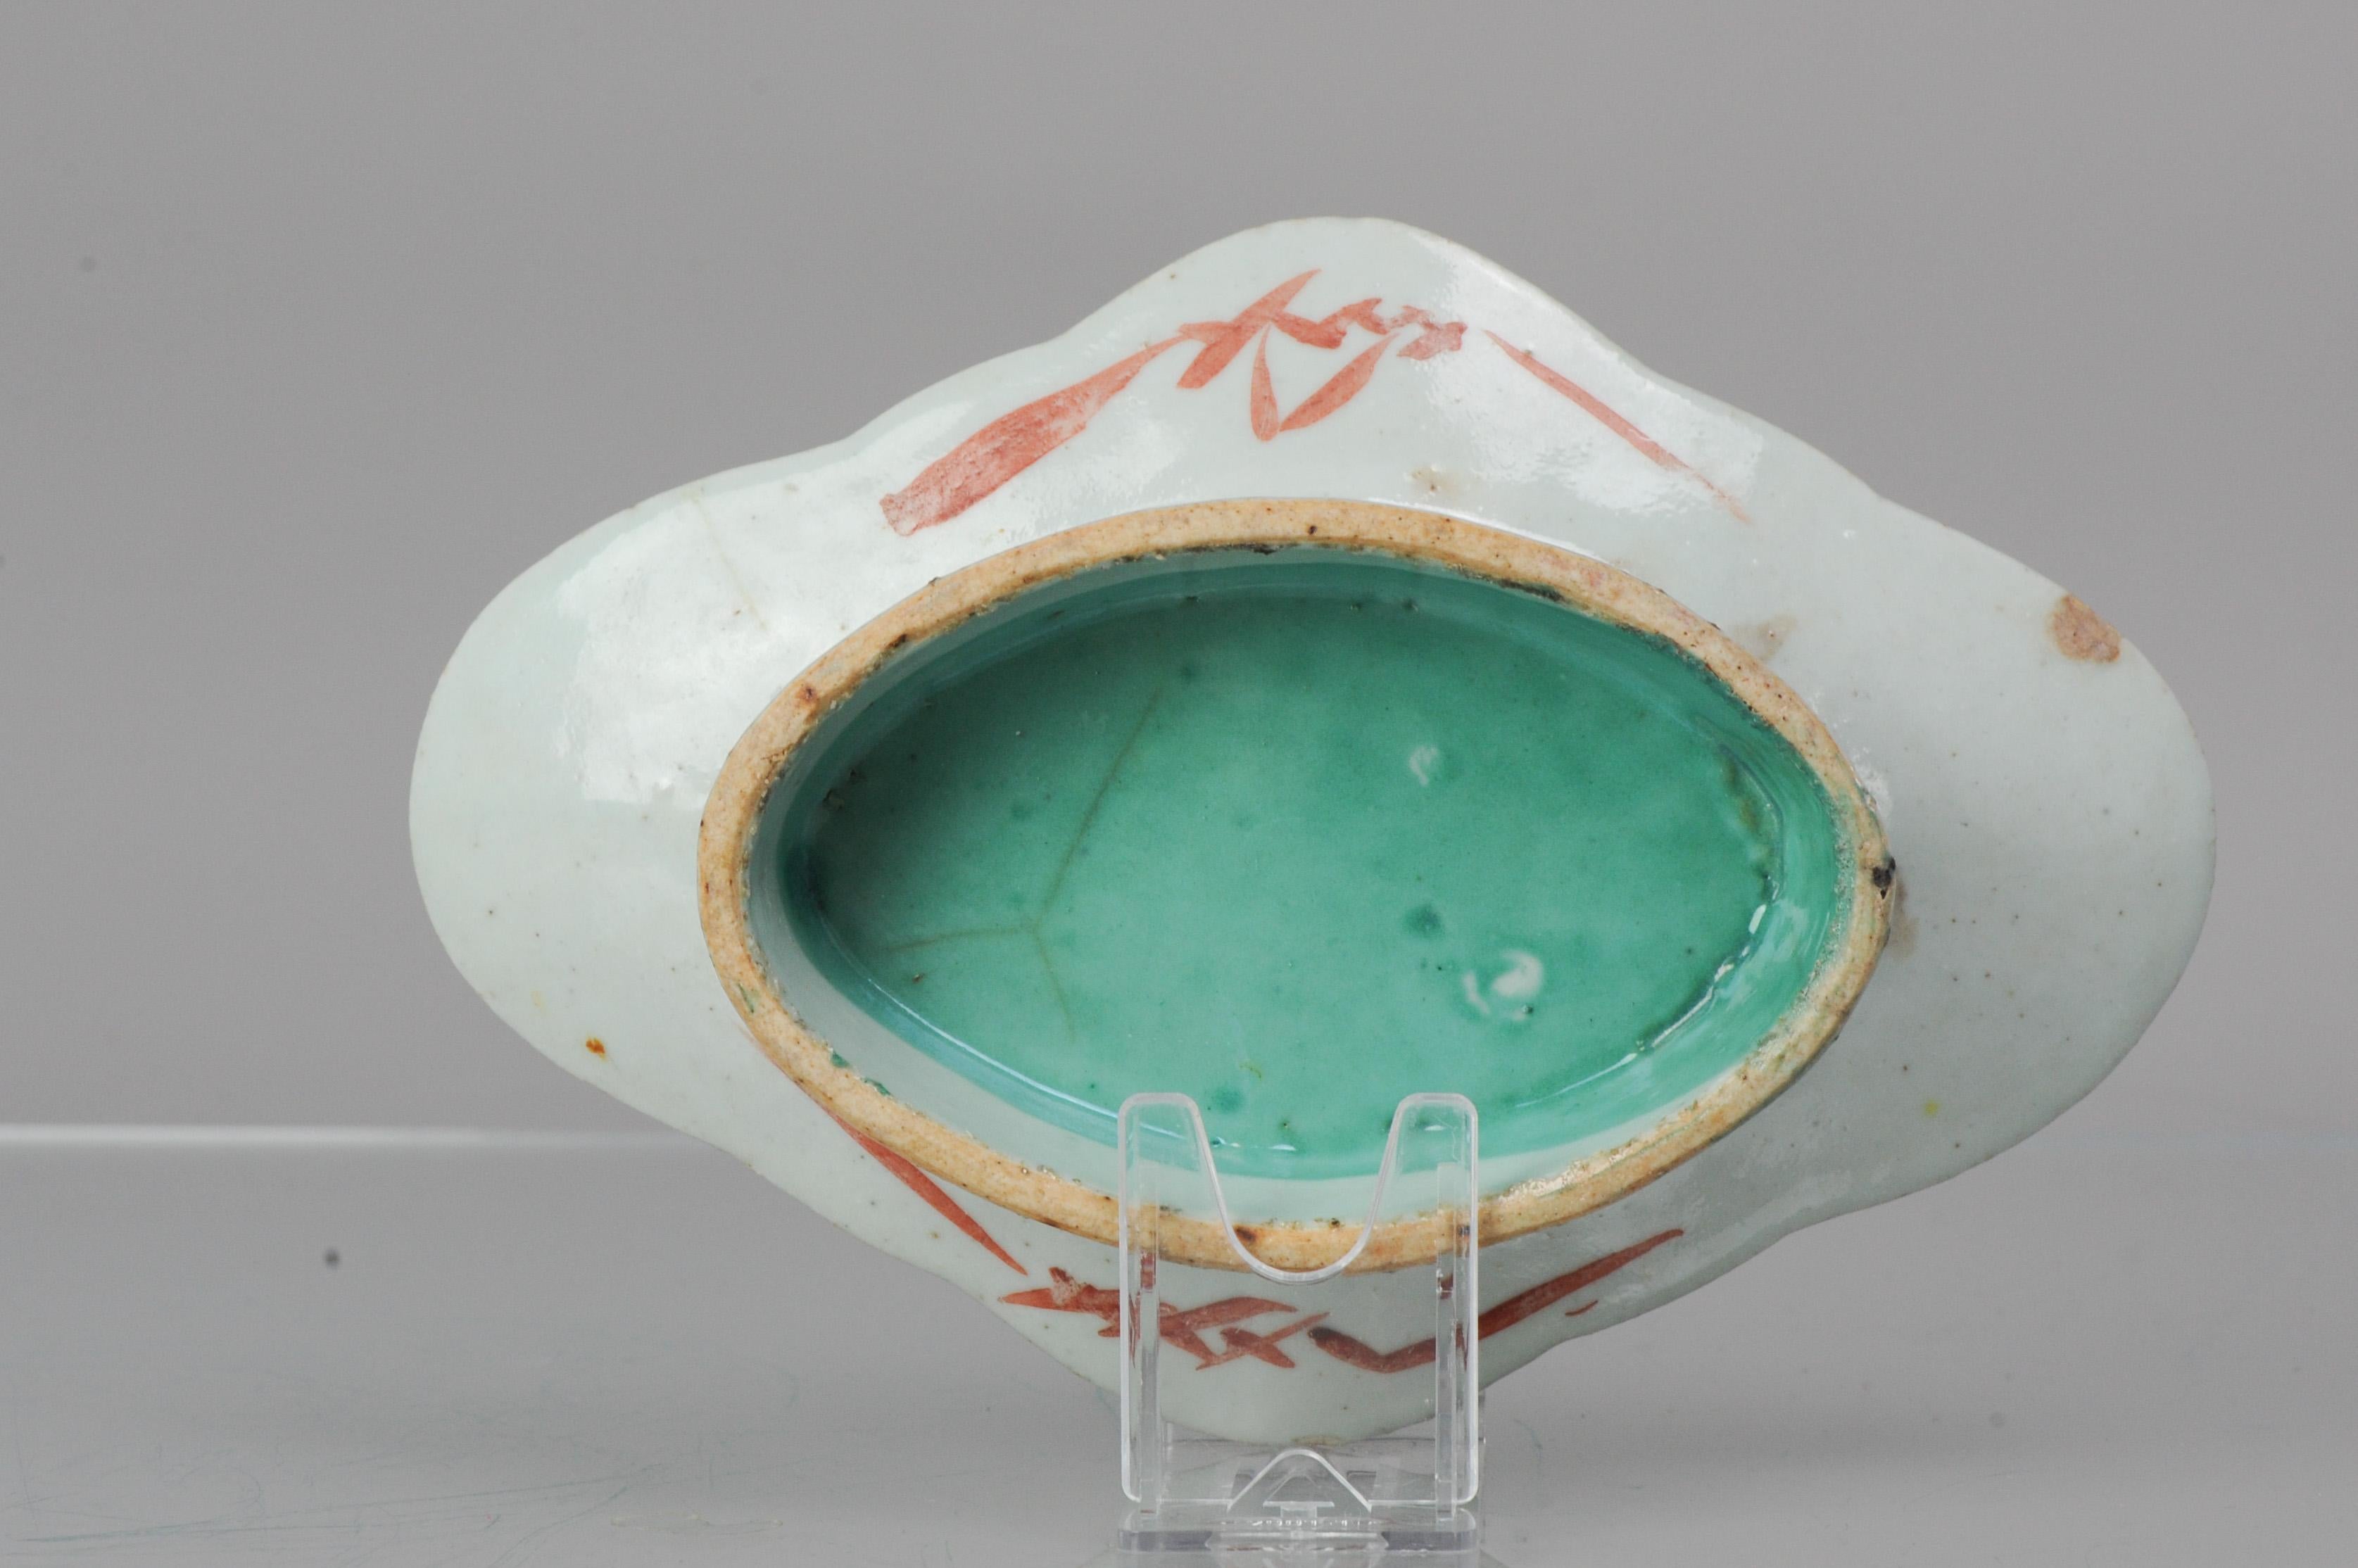 Antique Tazza Bowl Qing Flowers Tongzhi / Guangxu, 19th Century In Good Condition For Sale In Amsterdam, Noord Holland